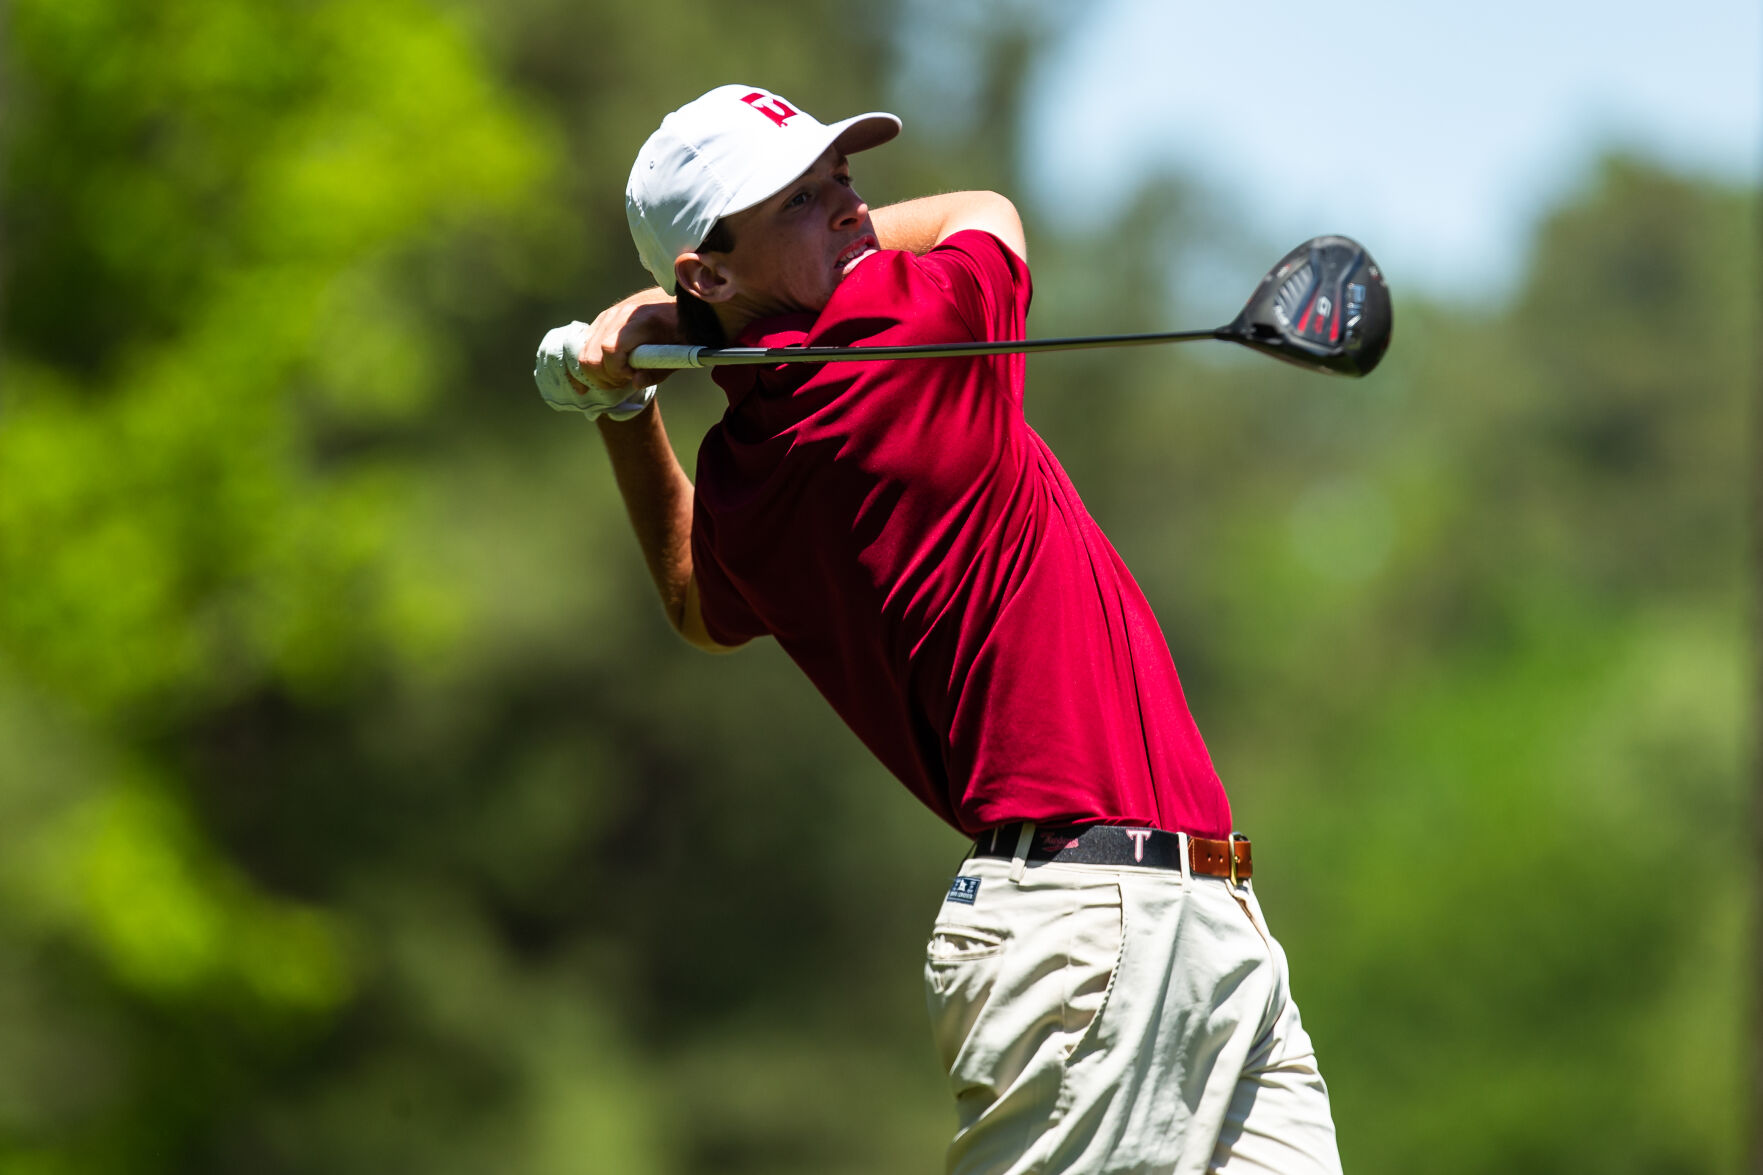 Troy golfers Scott, McFadden turn in strong finishes at Alabama State Amateur